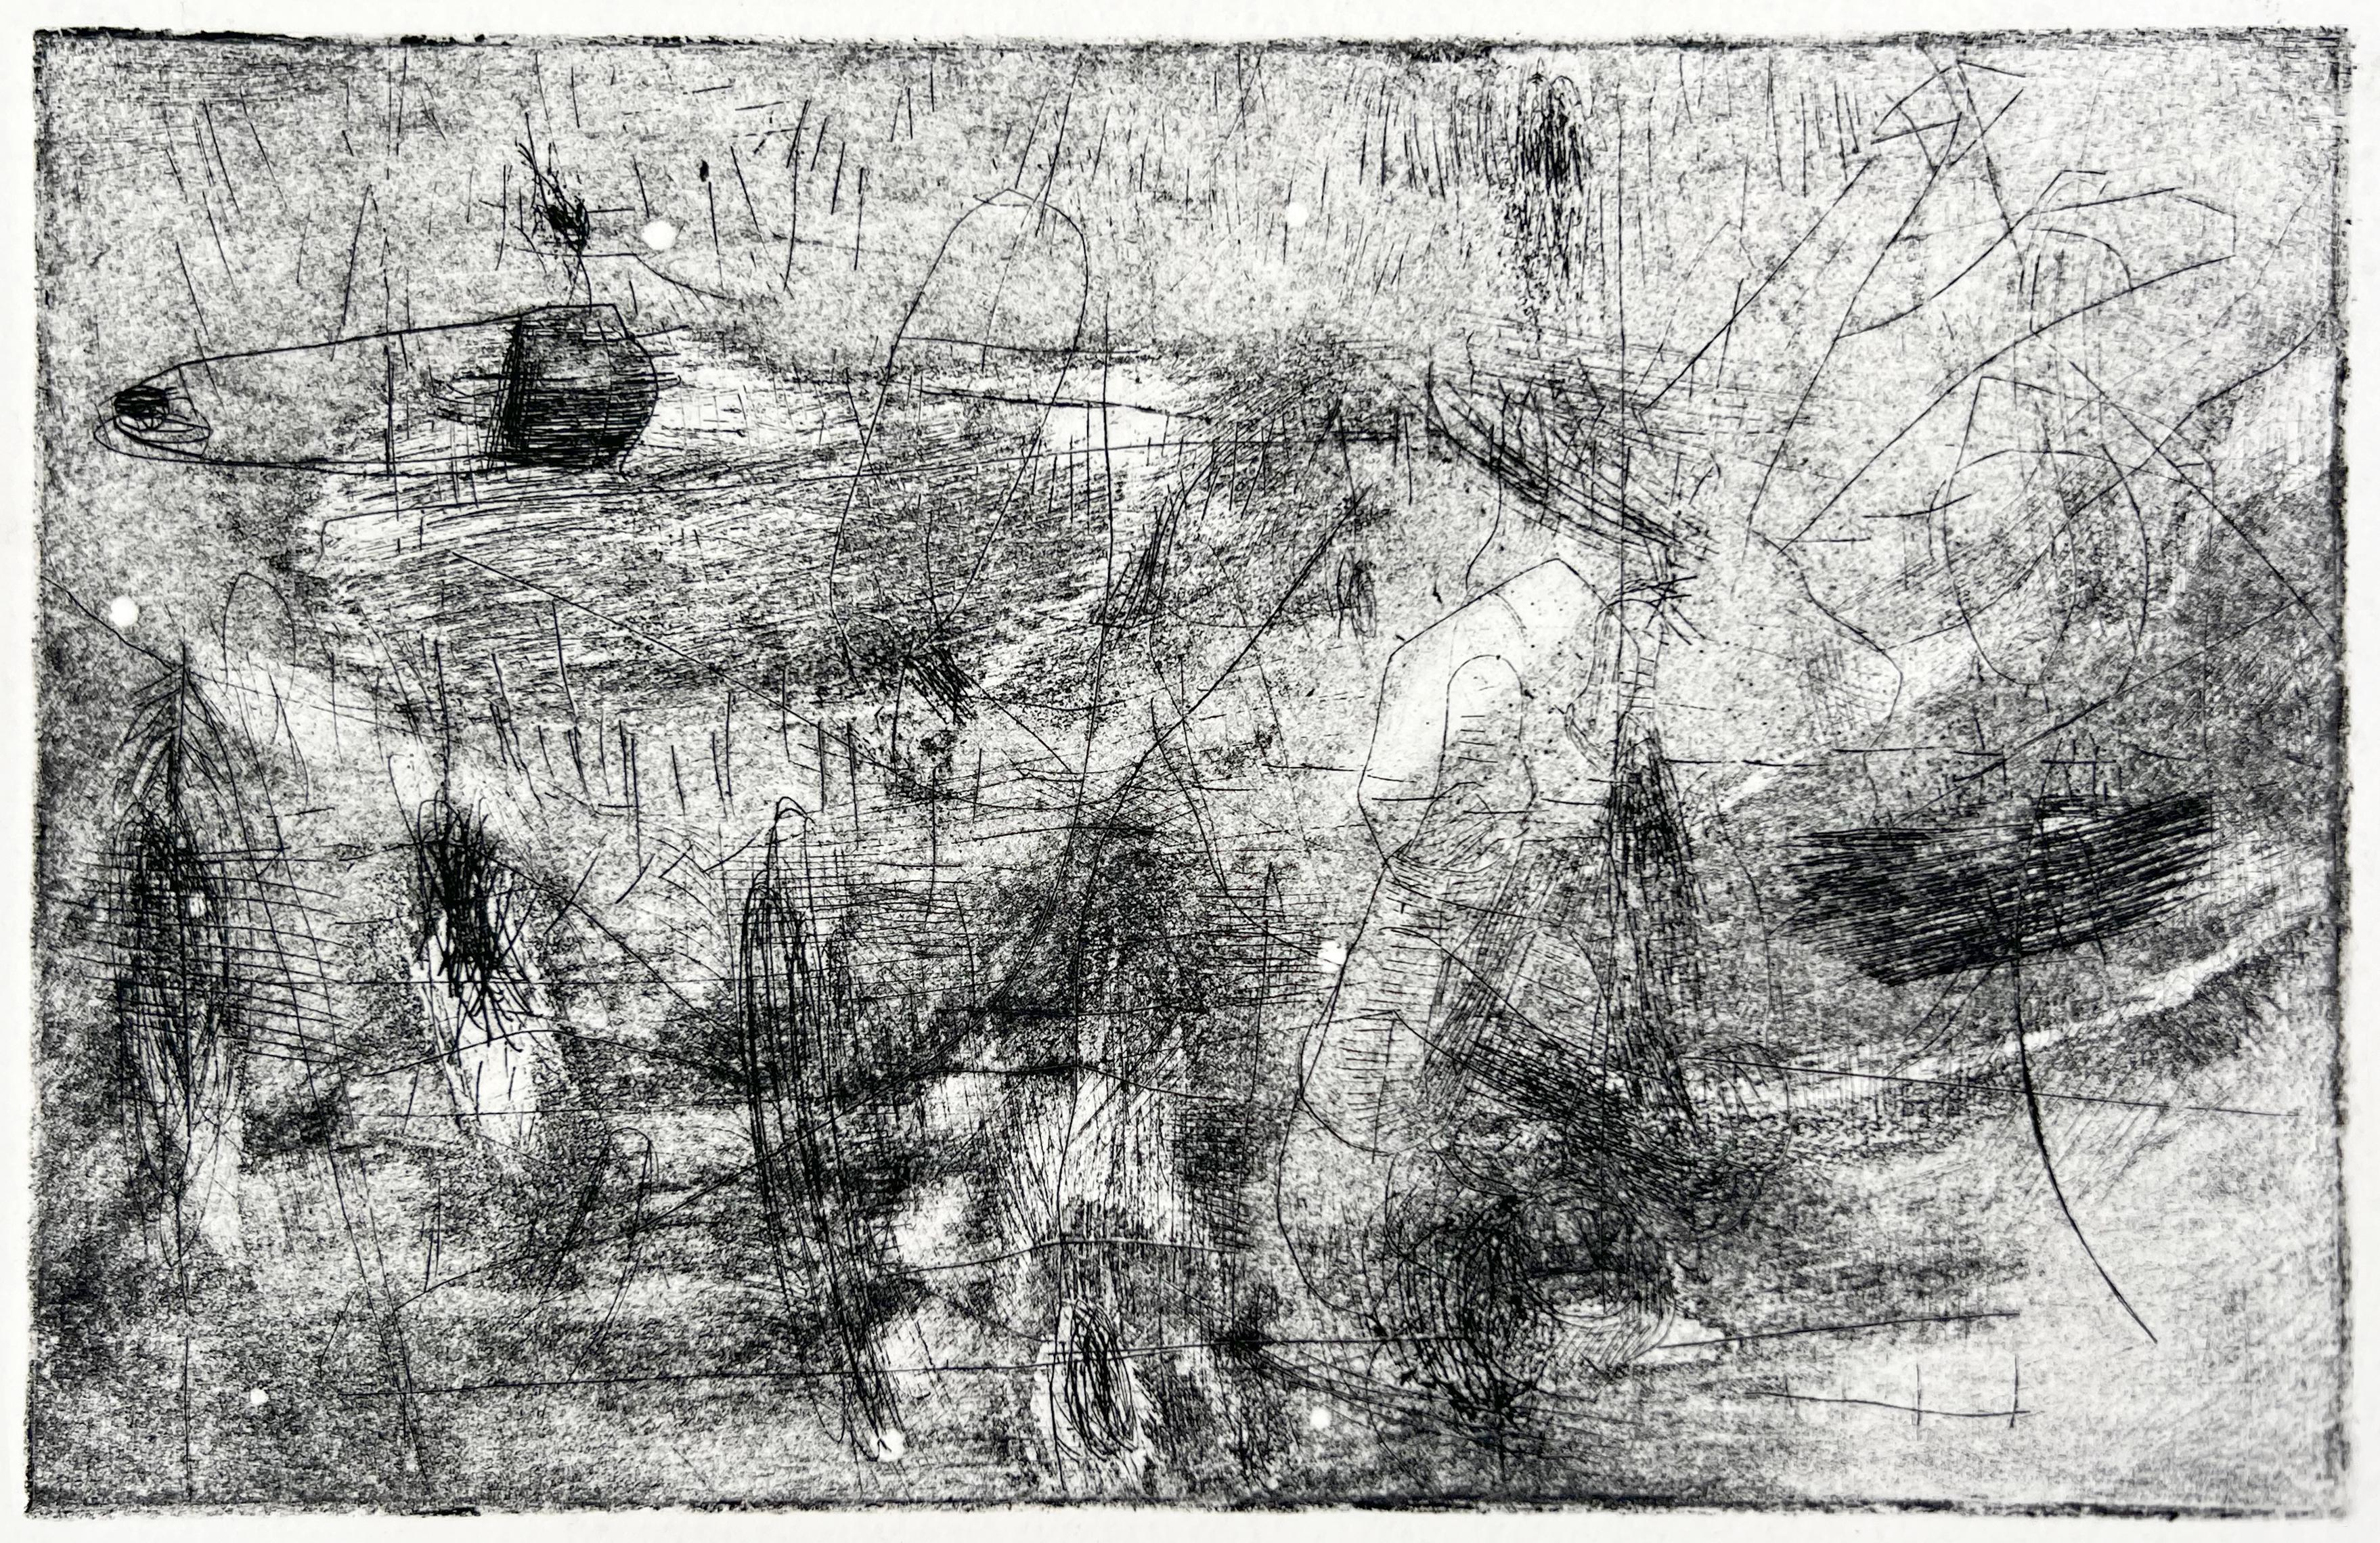 Abstract W/Woman Carrying a Young Child Finely Detailed Collotype on paper
Finely detailed etching or collotype of a complicated fine line drawing of abstract and objective imagery. Signed I believe upside down for effect or accidently. Difficult to